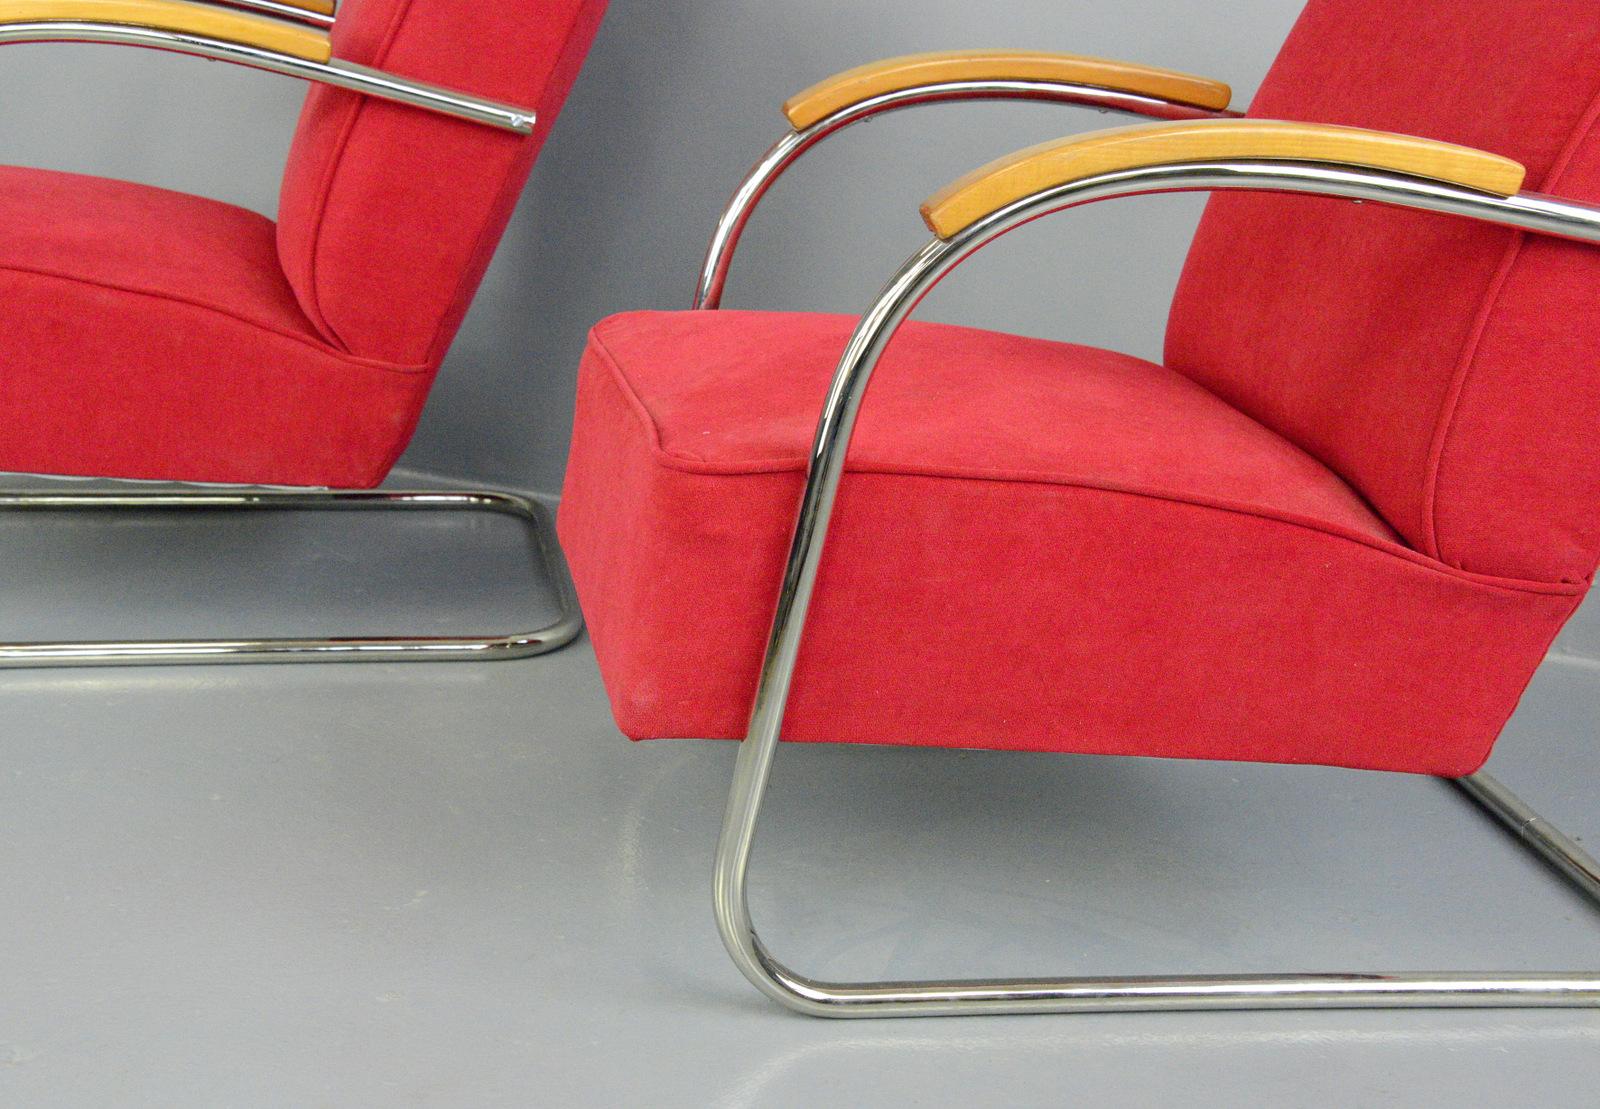 Bauhaus armchairs by Mucke Melder, circa 1930s.

- Price is for the pair
- Sprung seats and back rest
- Chrome-plated tubular steel cantilever frames
- New red velvet upholstery
- Model FN21
- Produced by Mucke Melder
- Czech, 1930s
-